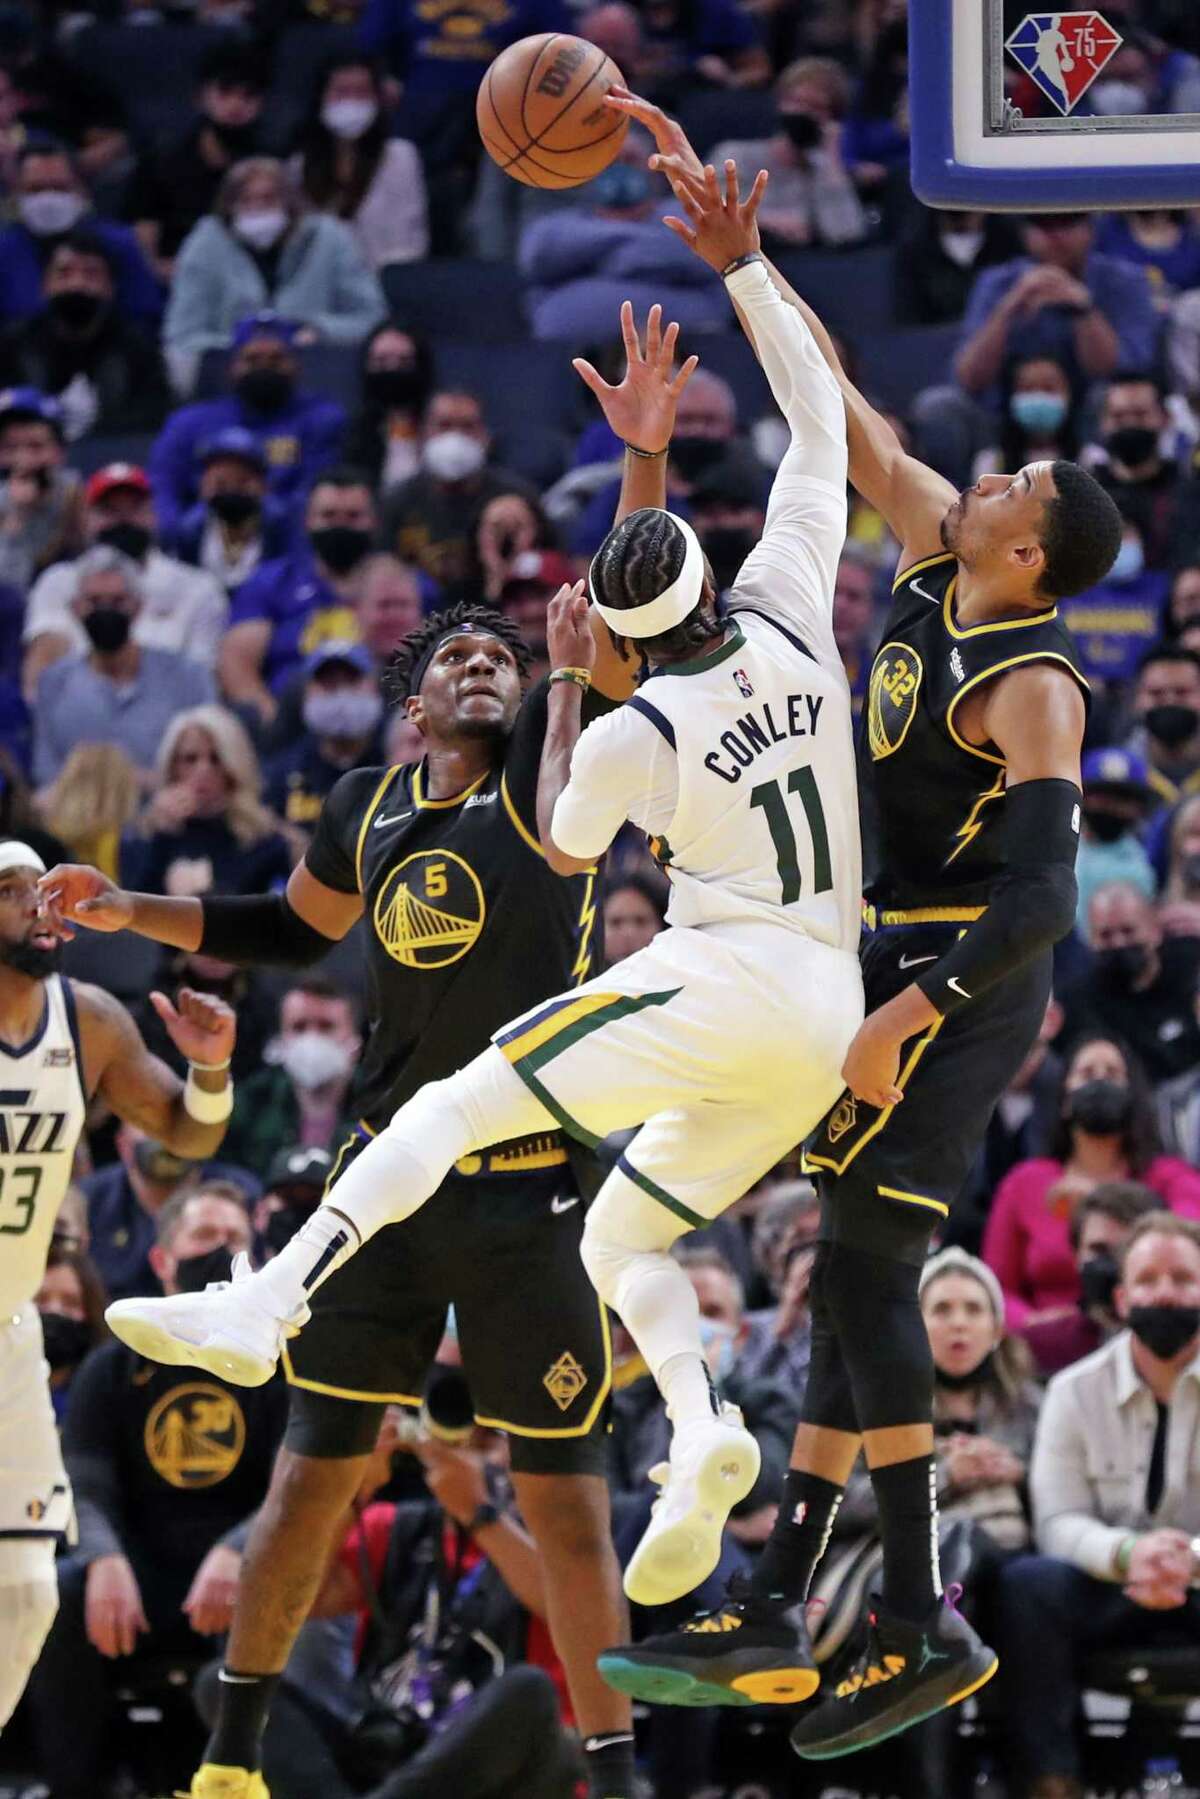 Golden State Warriors' Otto Porter, Jr. blocks a shot by Utah Jazz' Mike Conley late in 4th quarter of Warriors' 94-92 win in NBA game in San Francisco, Calif., on Sunday, January 23, 2022.